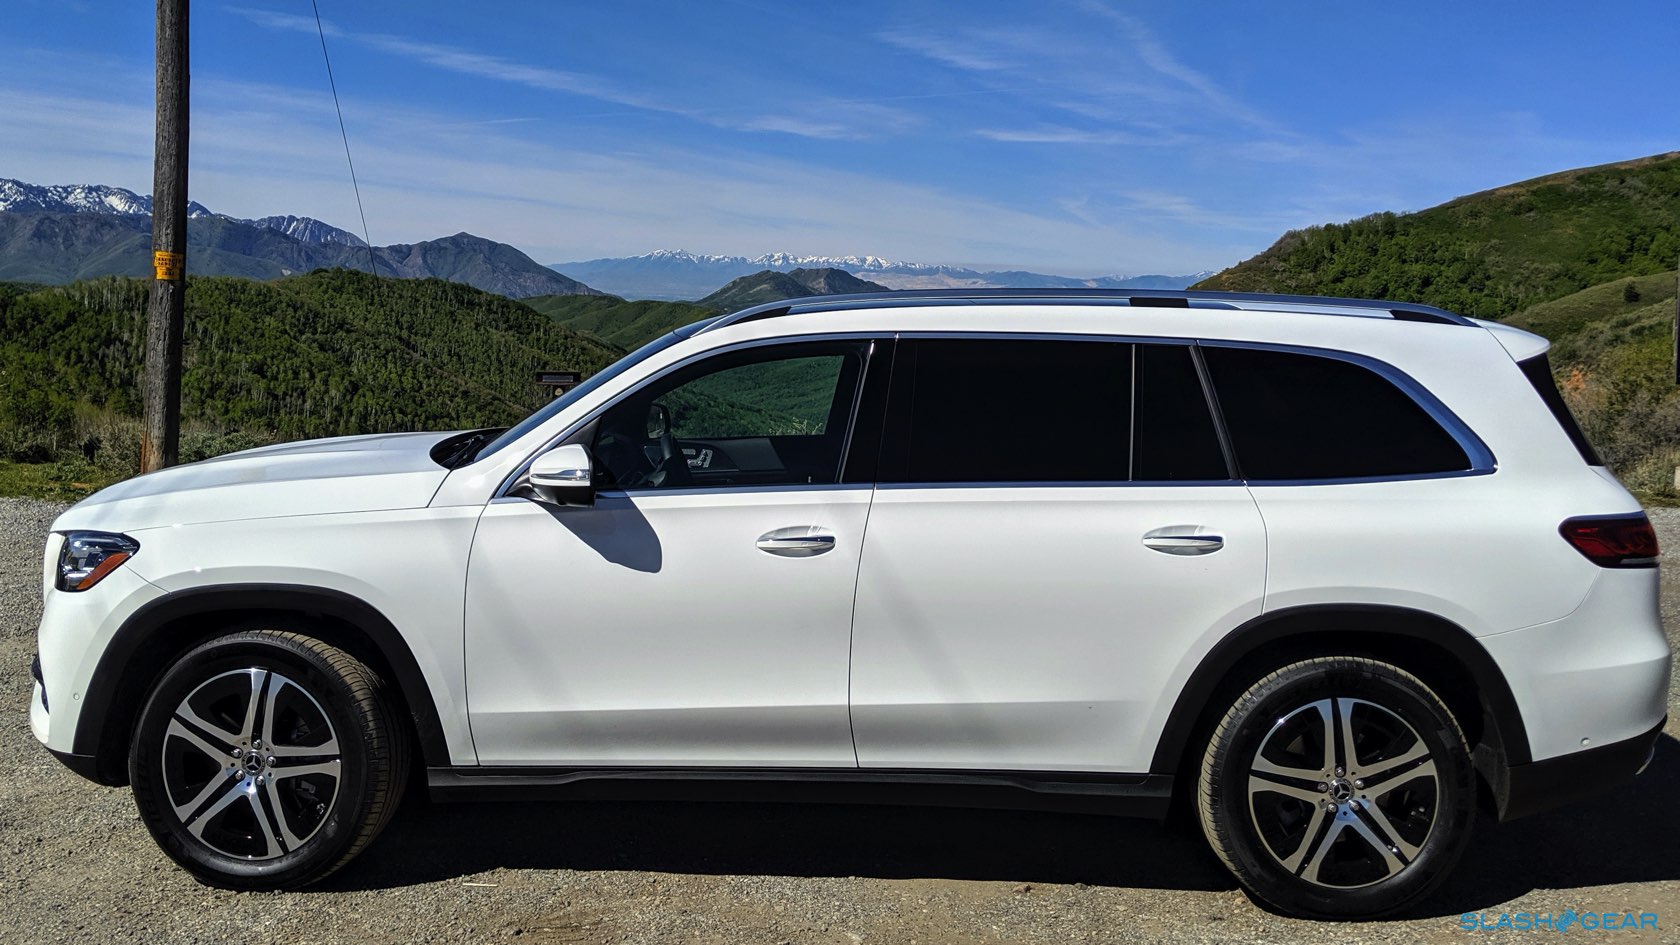 Mercedes Benz Gls First Drive Review The Suv That Thinks It S An S Class Slashgear